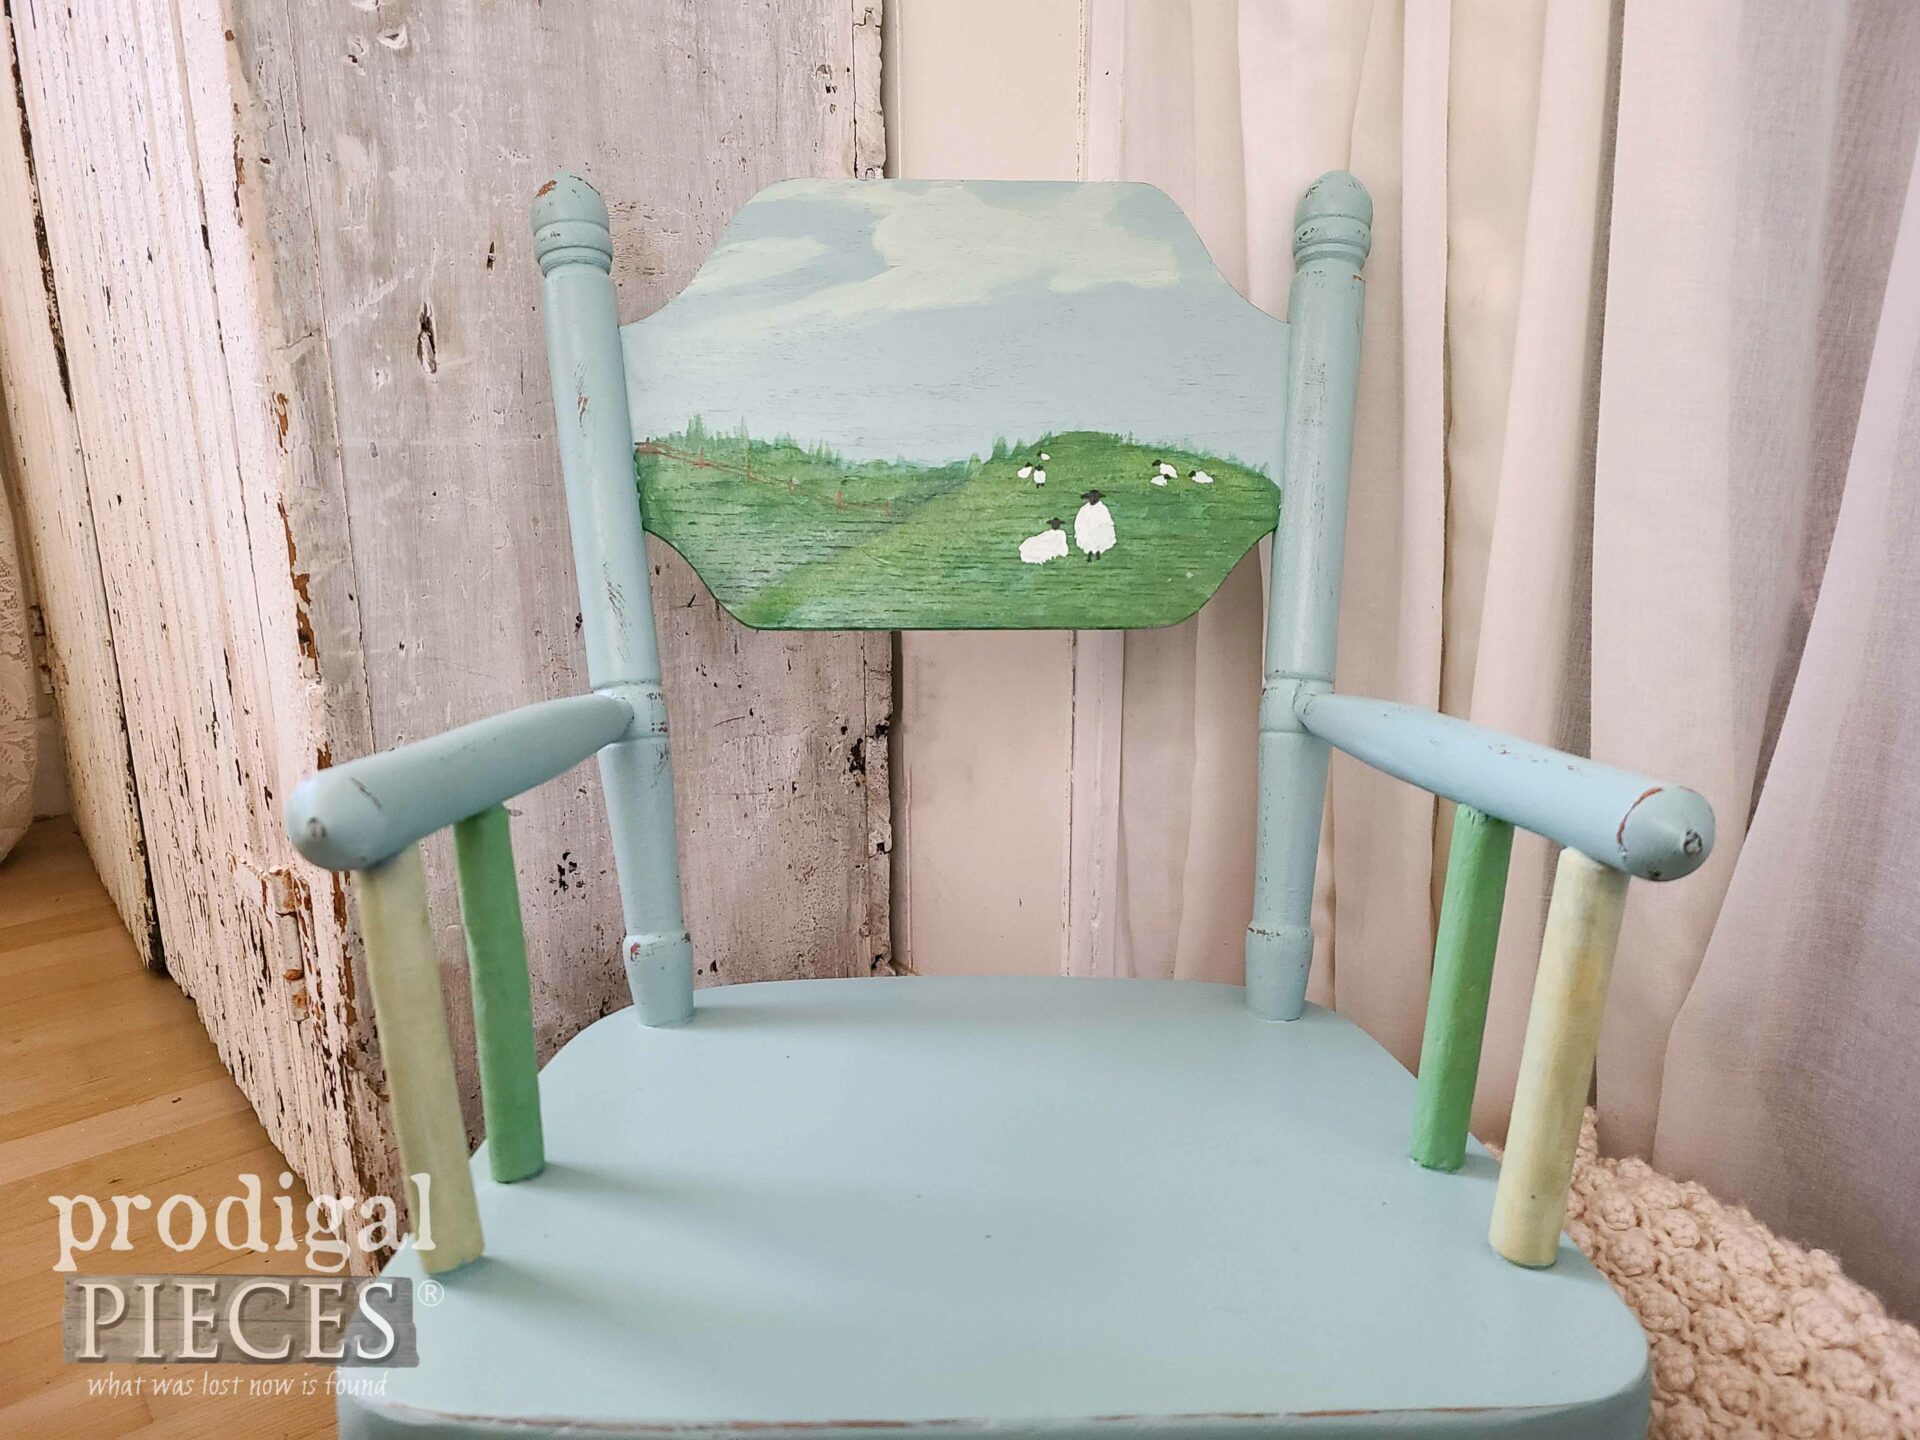 Farmhouse Rocking Chair with Hand-Painted Sheep by Larissa of Prodigal Pieces | prodigalpieces.com #prodigalpieces #furniture #diy #thrifted